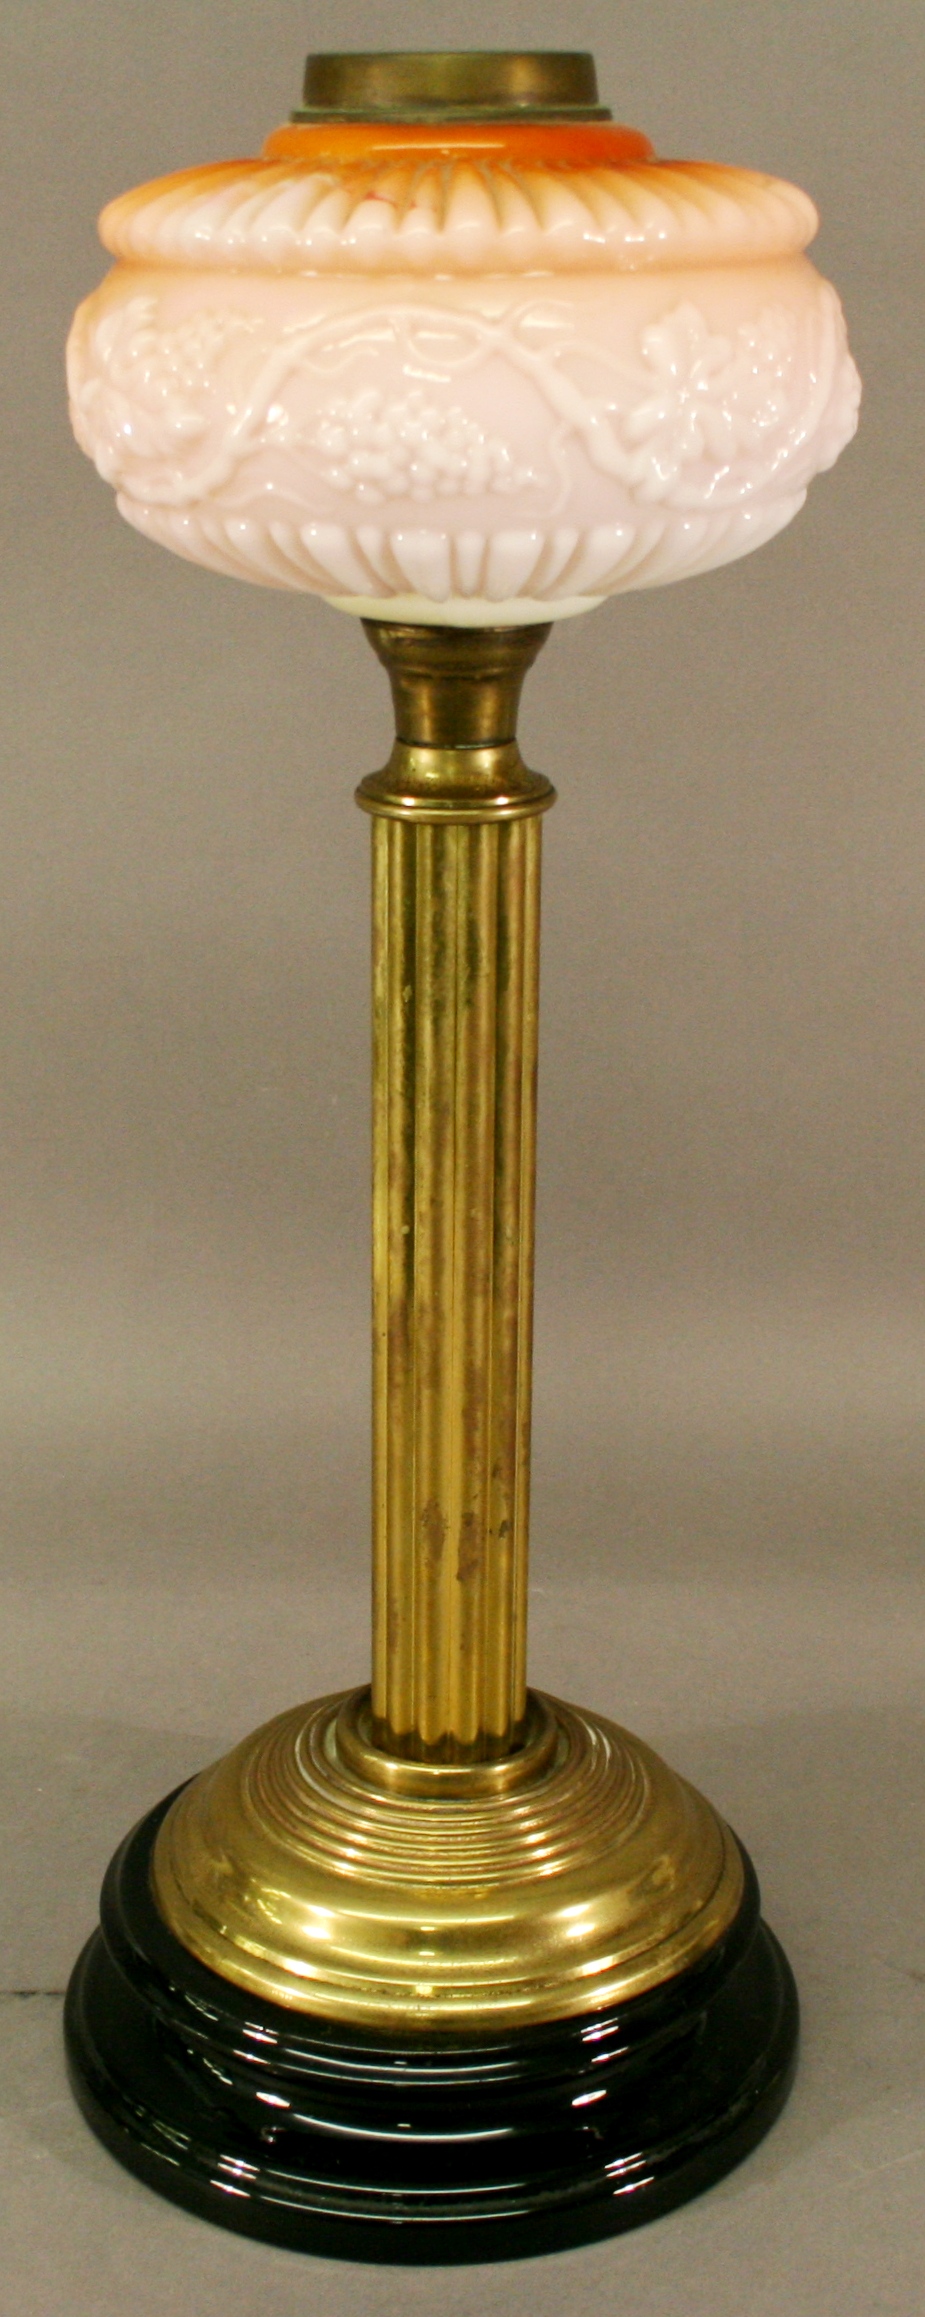 A VICTORIAN BRASS AND GLASS COLUMN OIL LAMP having a tinted globular shade, brass burner and moulded